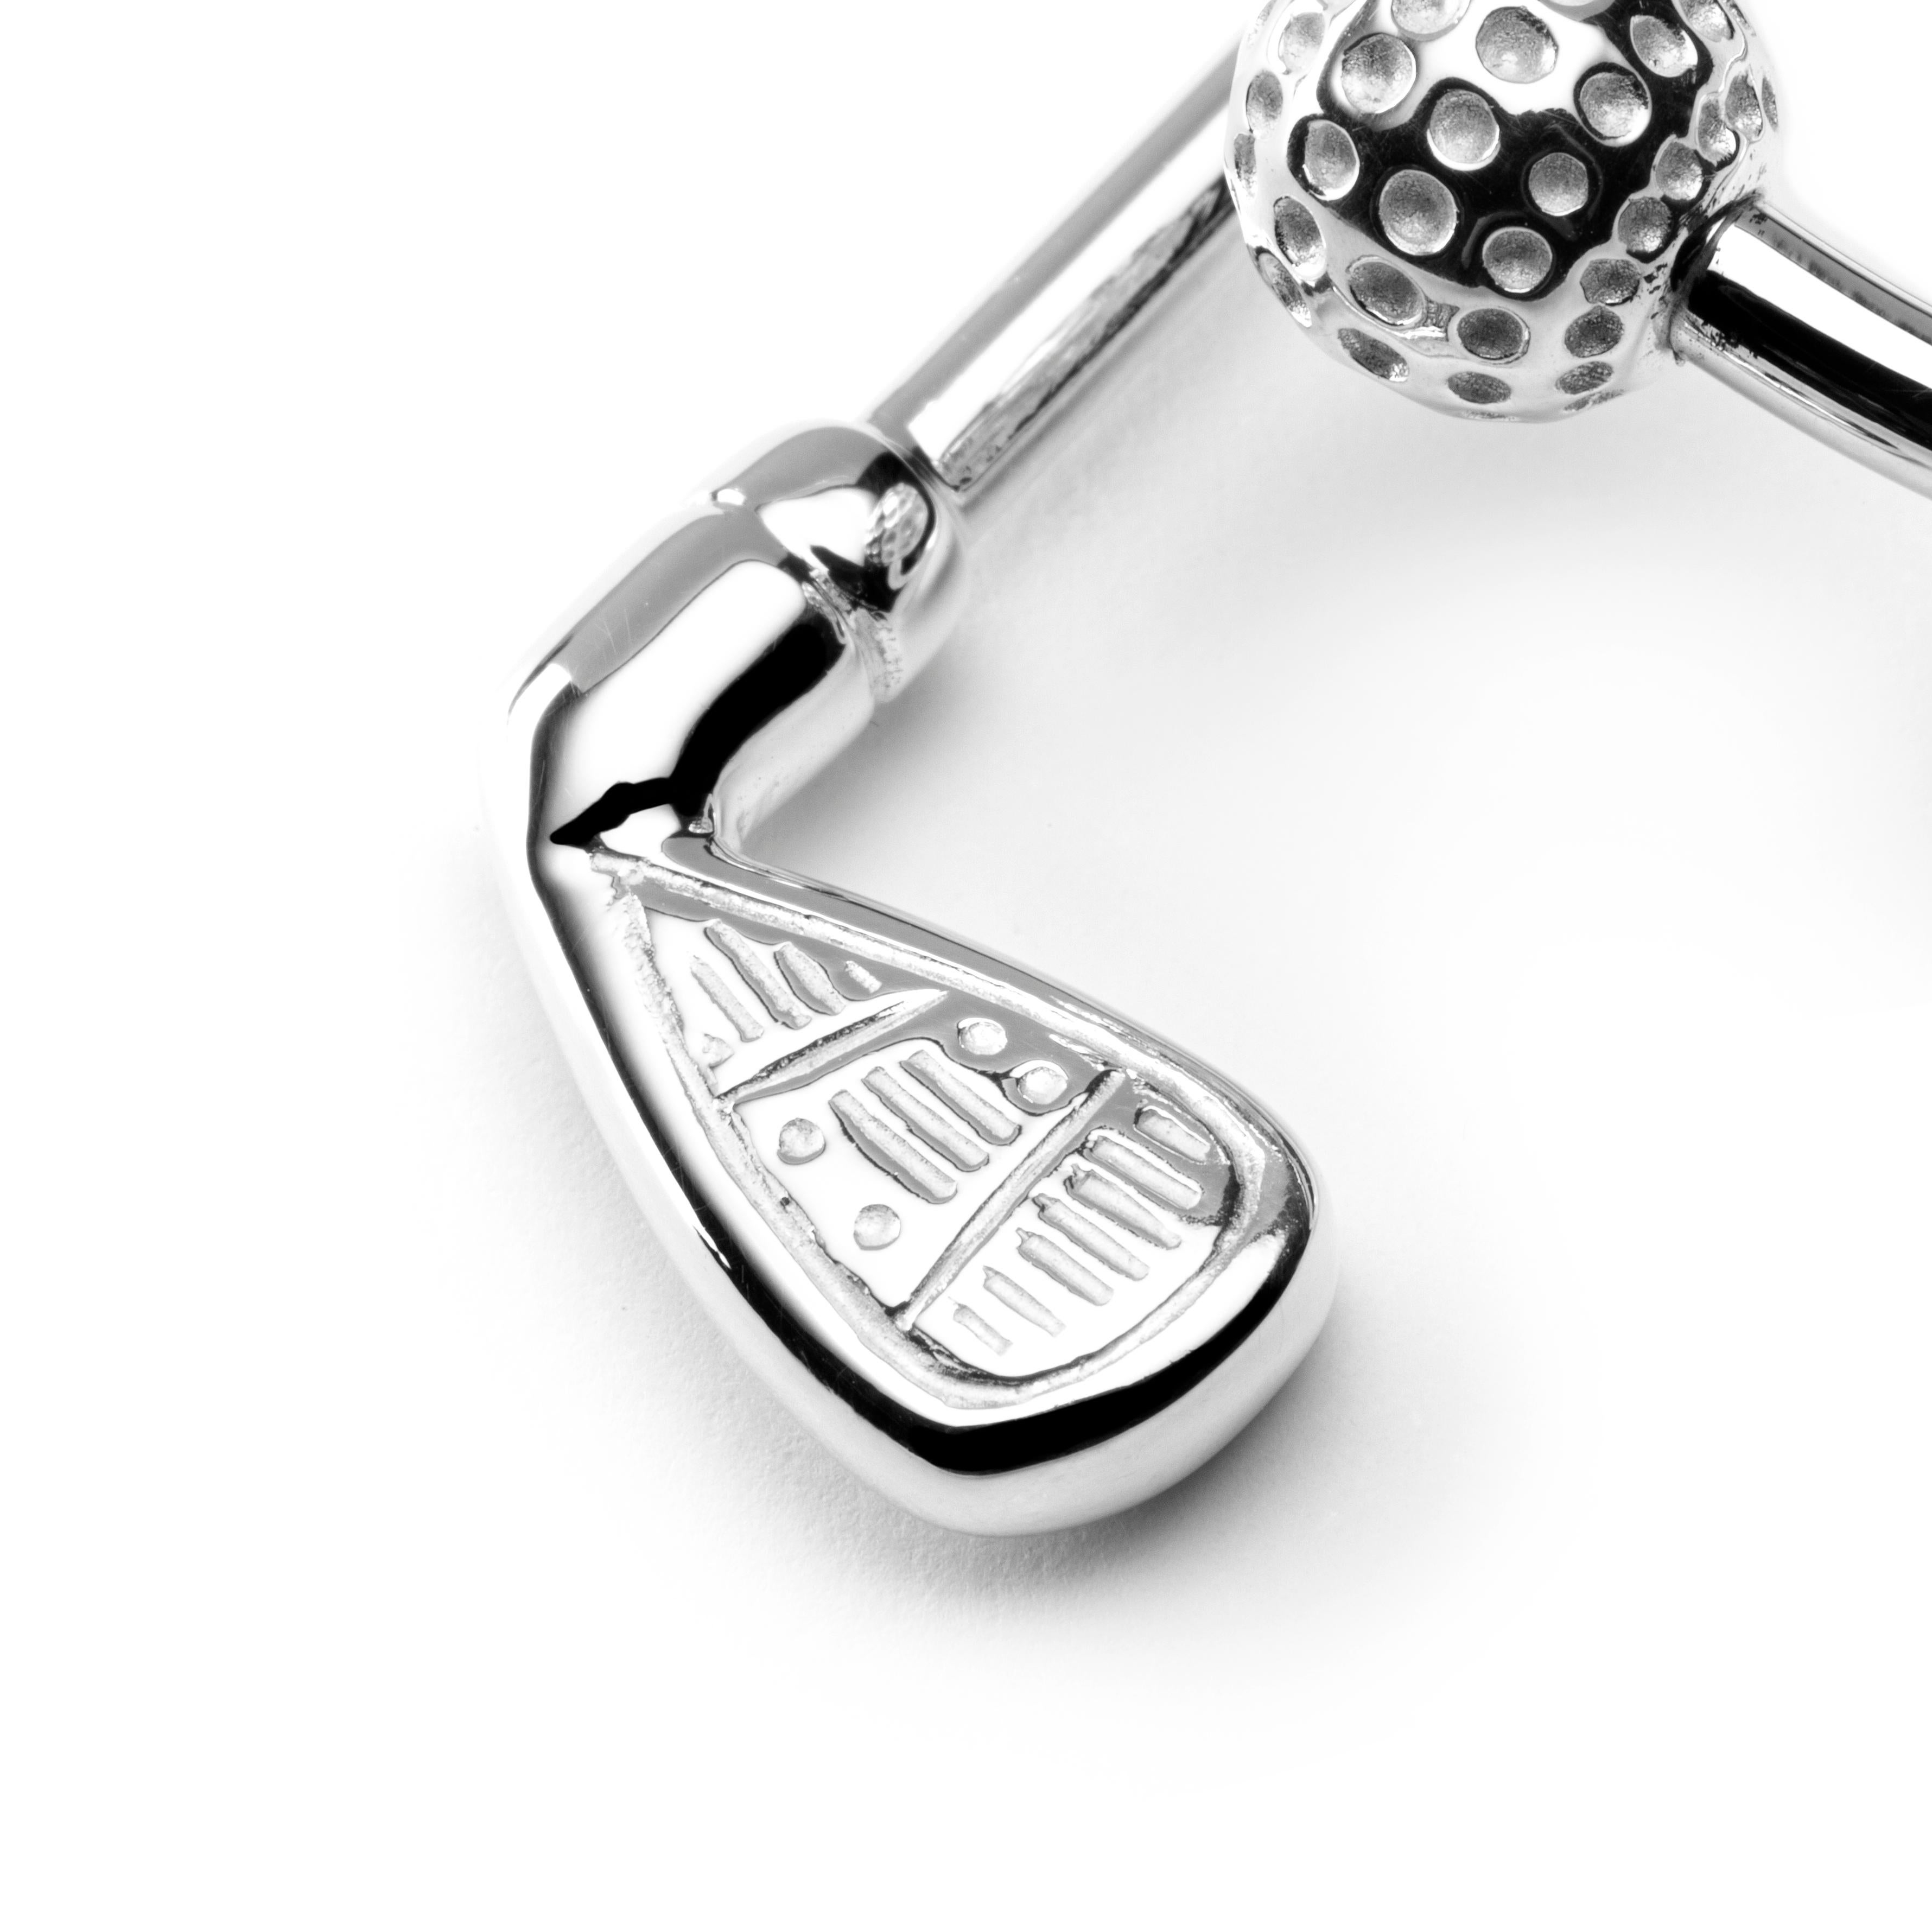 Alex Jona design collection, hand crafted in Italy, rhodium plated sterling silver Ball and Golf-Club key holder. Dimensions : L x 2 in/ 50.91 mm x W x 1.12 in/ 28.4 mm.
Alex Jona gifts stand out, not only for their special design and for the